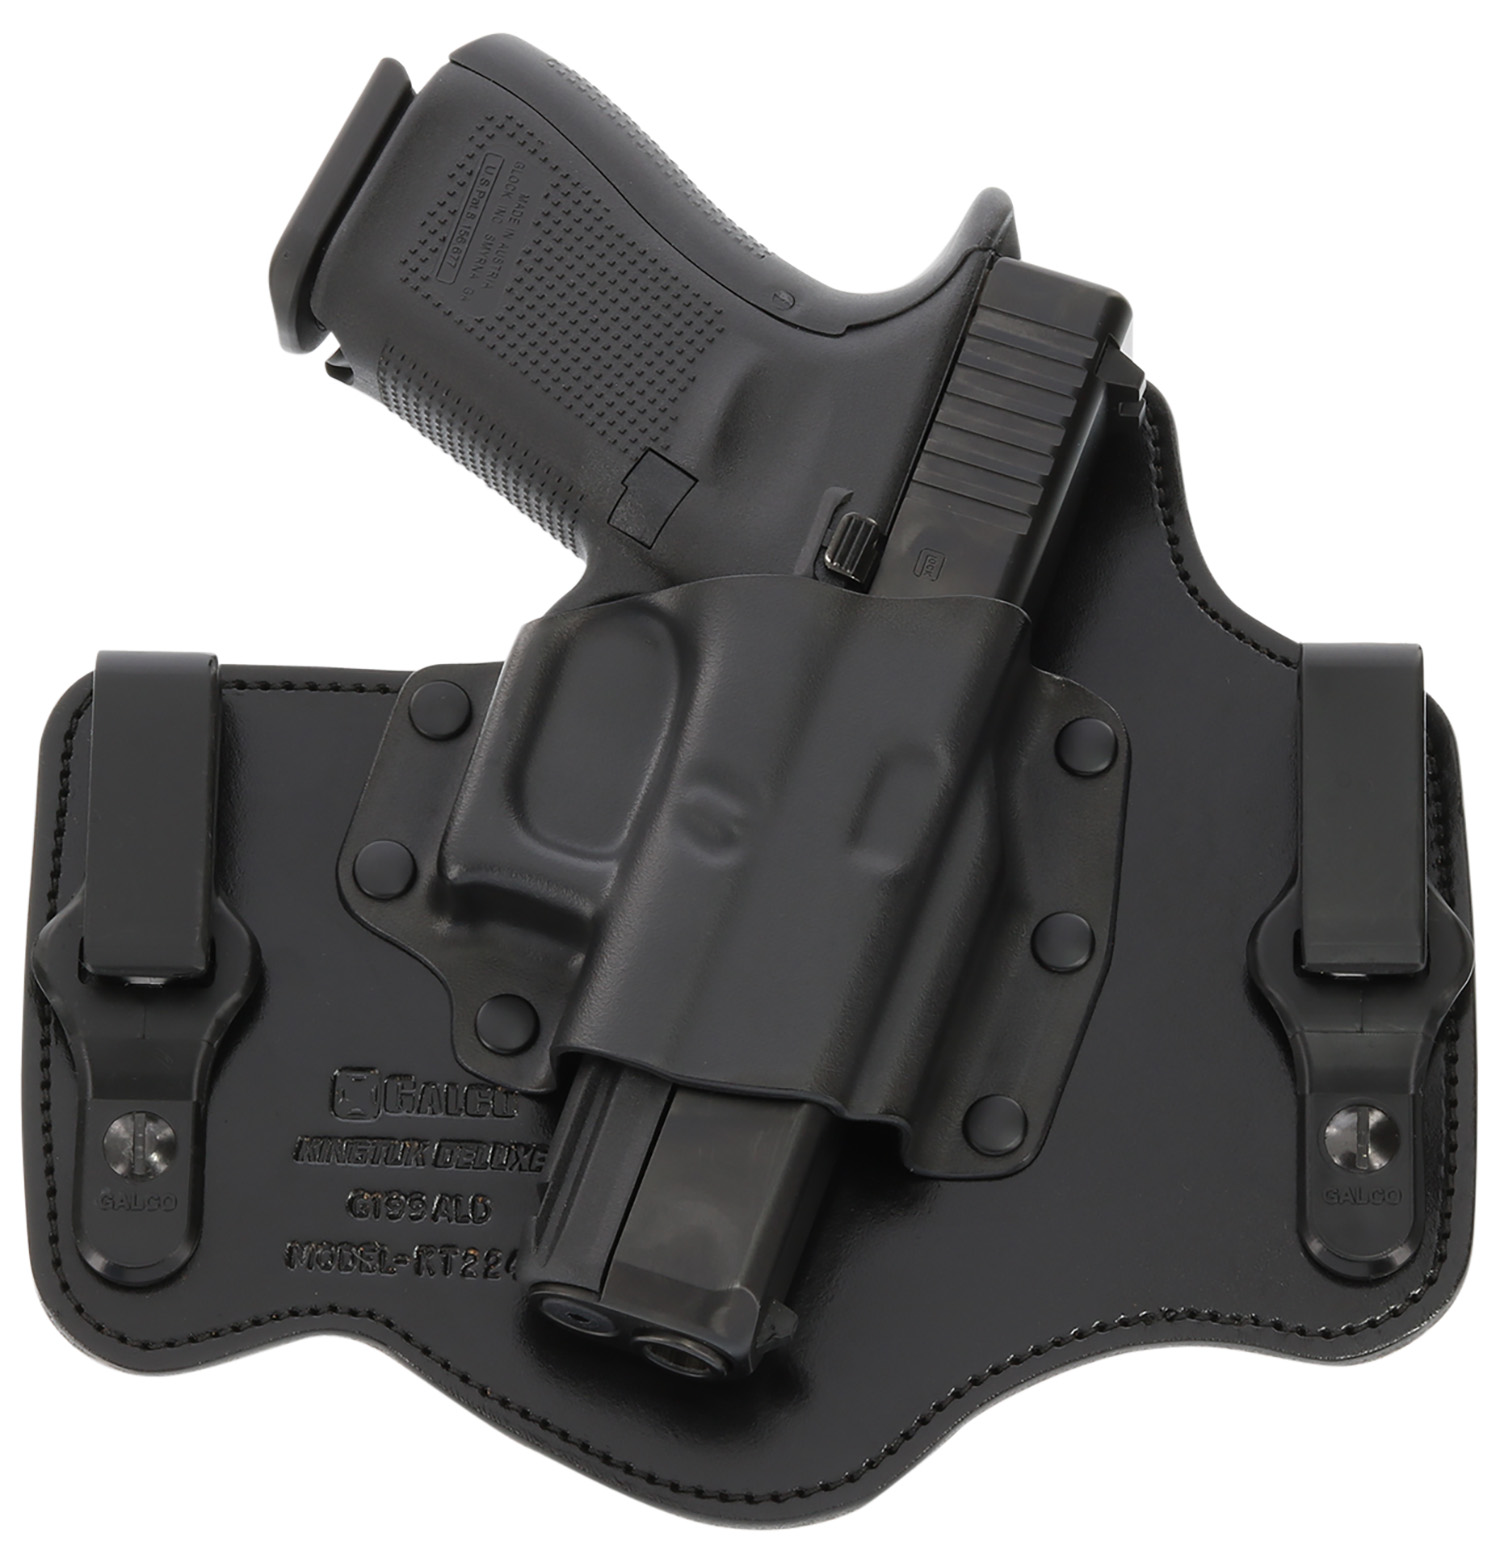 Galco KT224B KingTuk Deluxe Black Kydex Holster w/Leather Backing IWB fits Glock 17,19,22-23,26-27,31-33 Right Hand